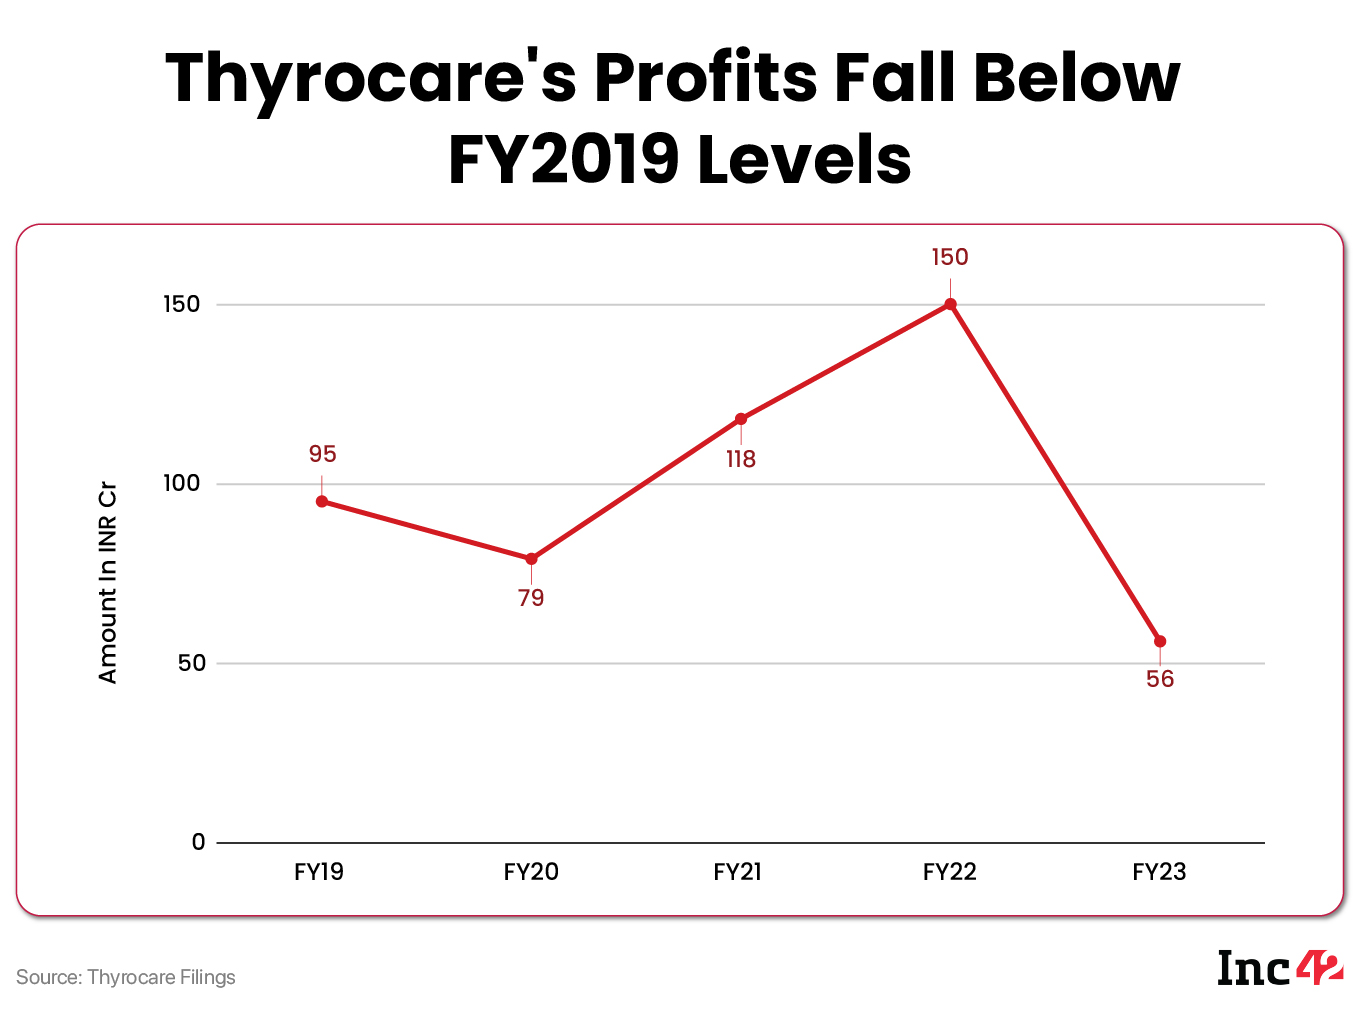 Thyrocare Profits Plummet Soon After the Acquisition By Pharmeasy